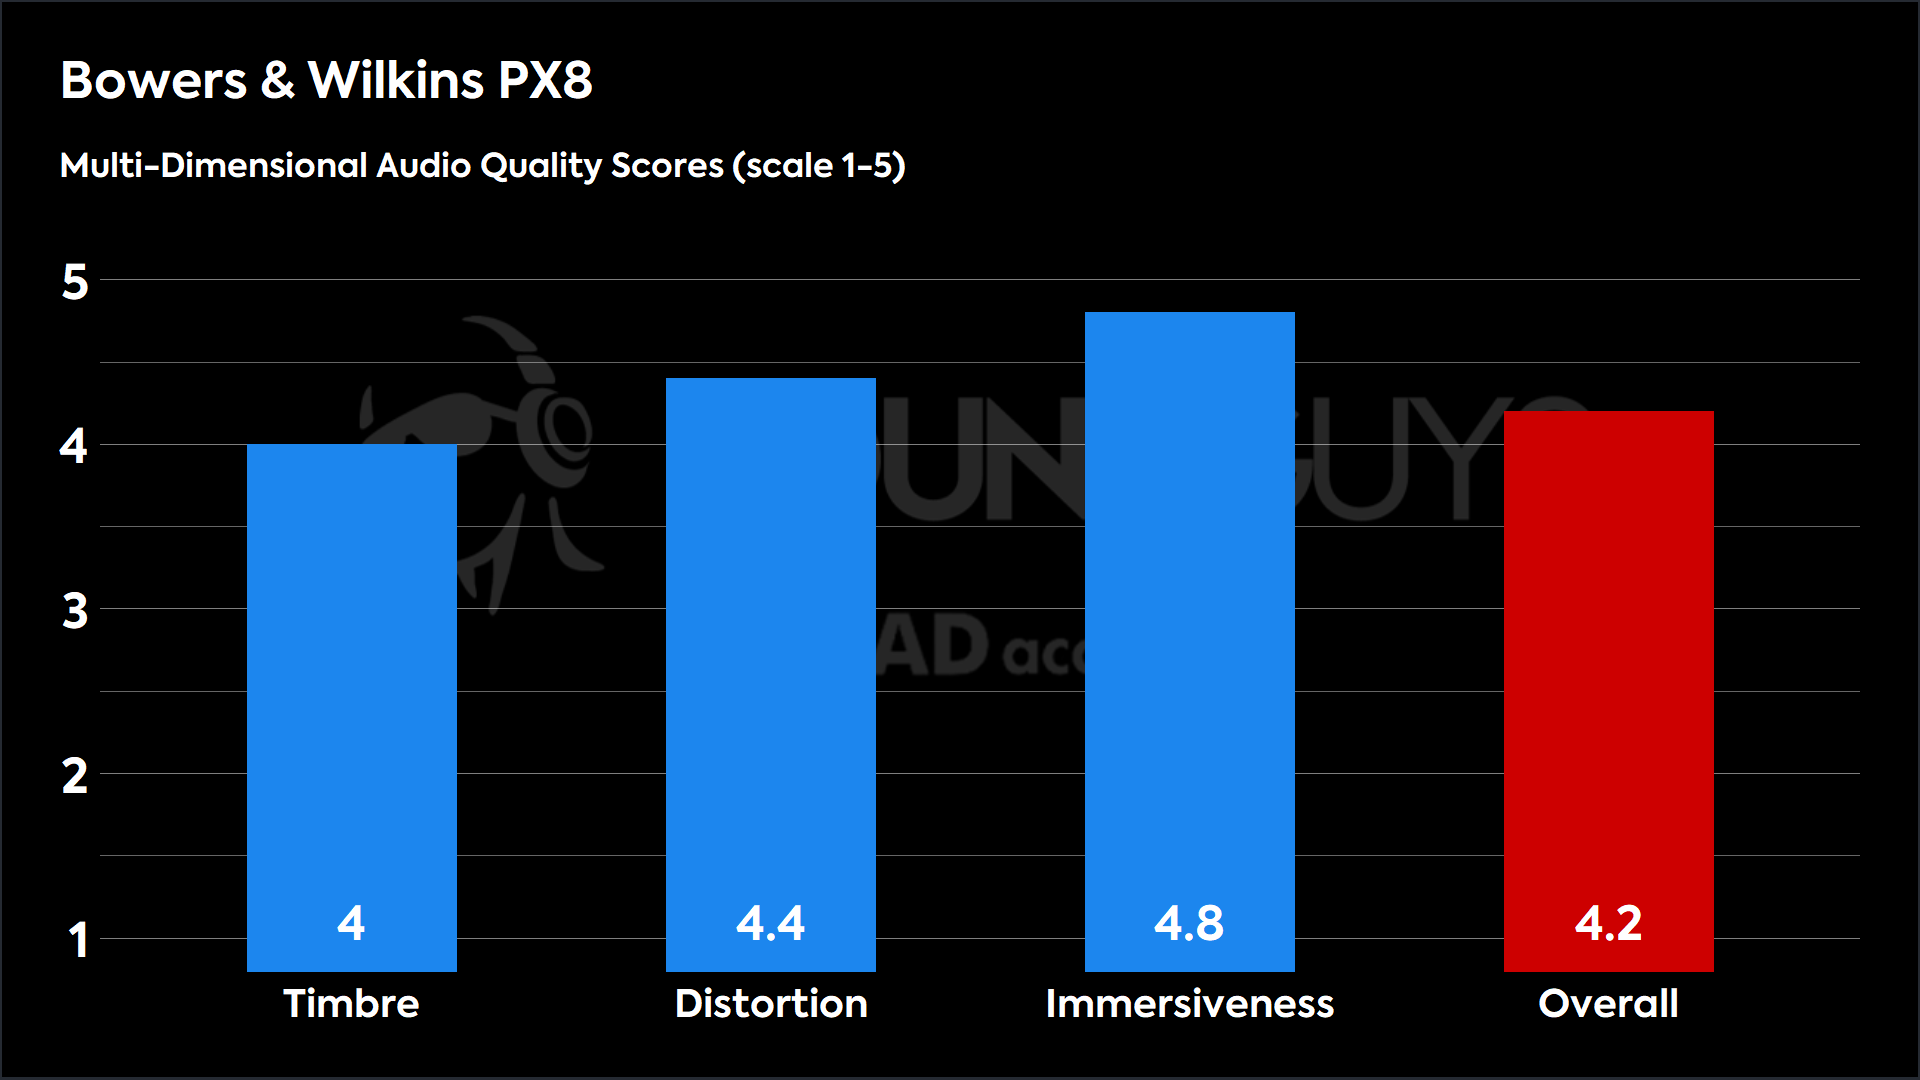 This chart shows the MDAQS results for the Bowers &amp; Wilkins PX8 in Default mode. The Timbre score is 4, The Distortion score is 4.4, the Immersiveness score is 4.8, and the Overall Score is 4.2).